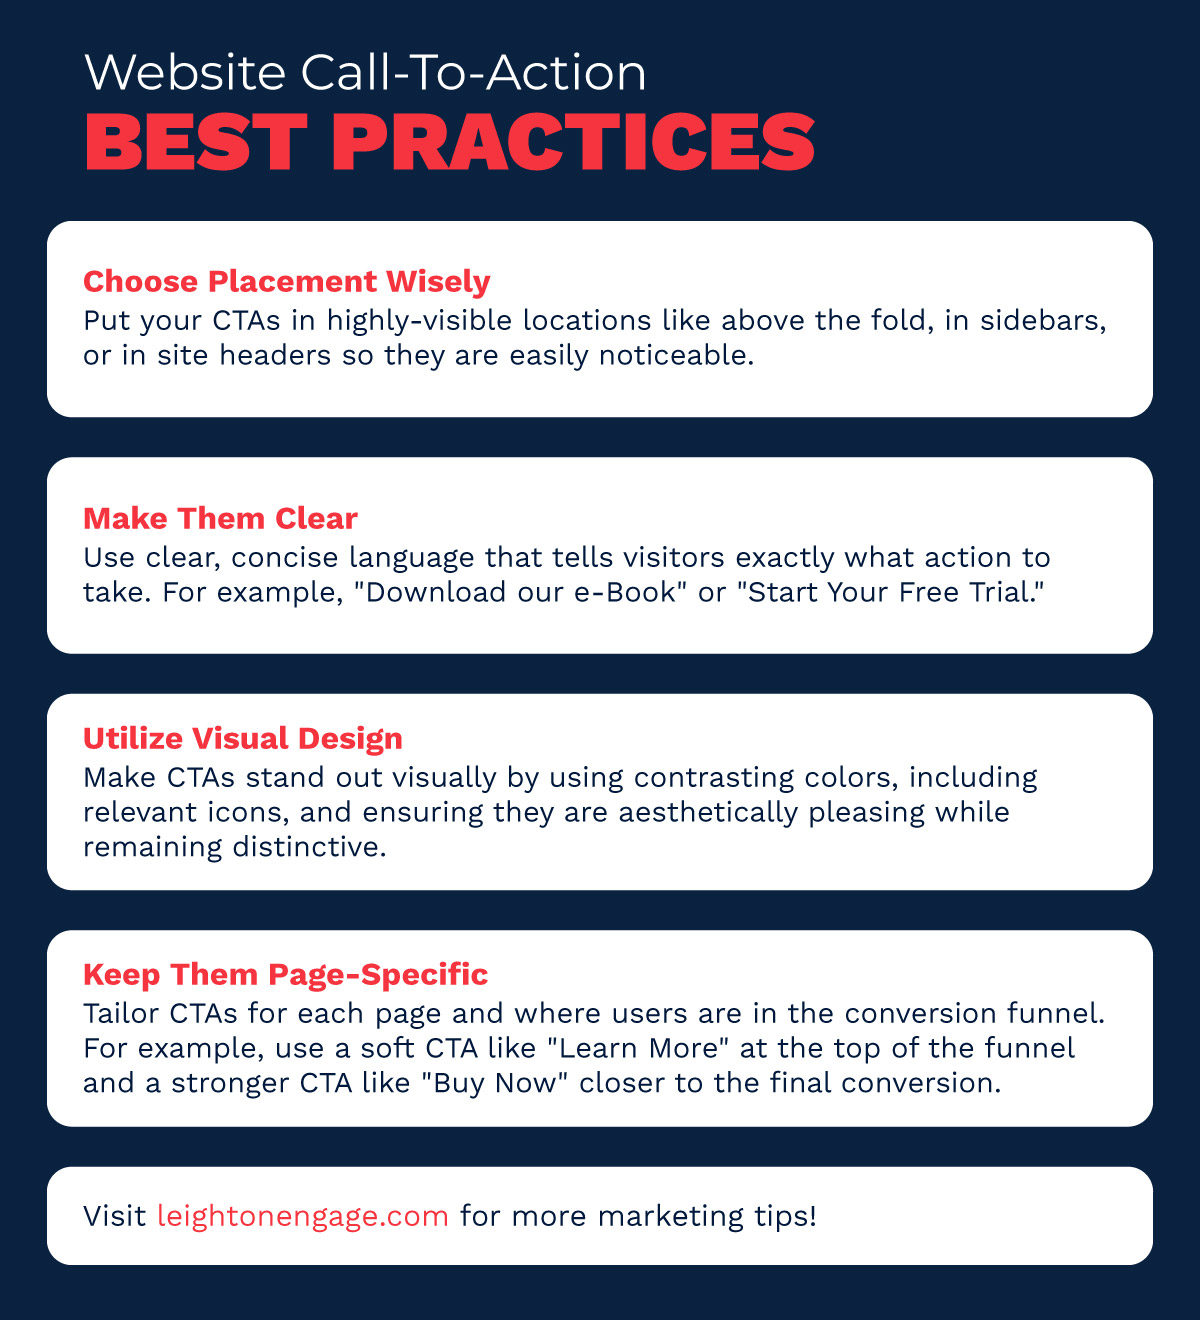 Graphic showing website call-to-action best practices